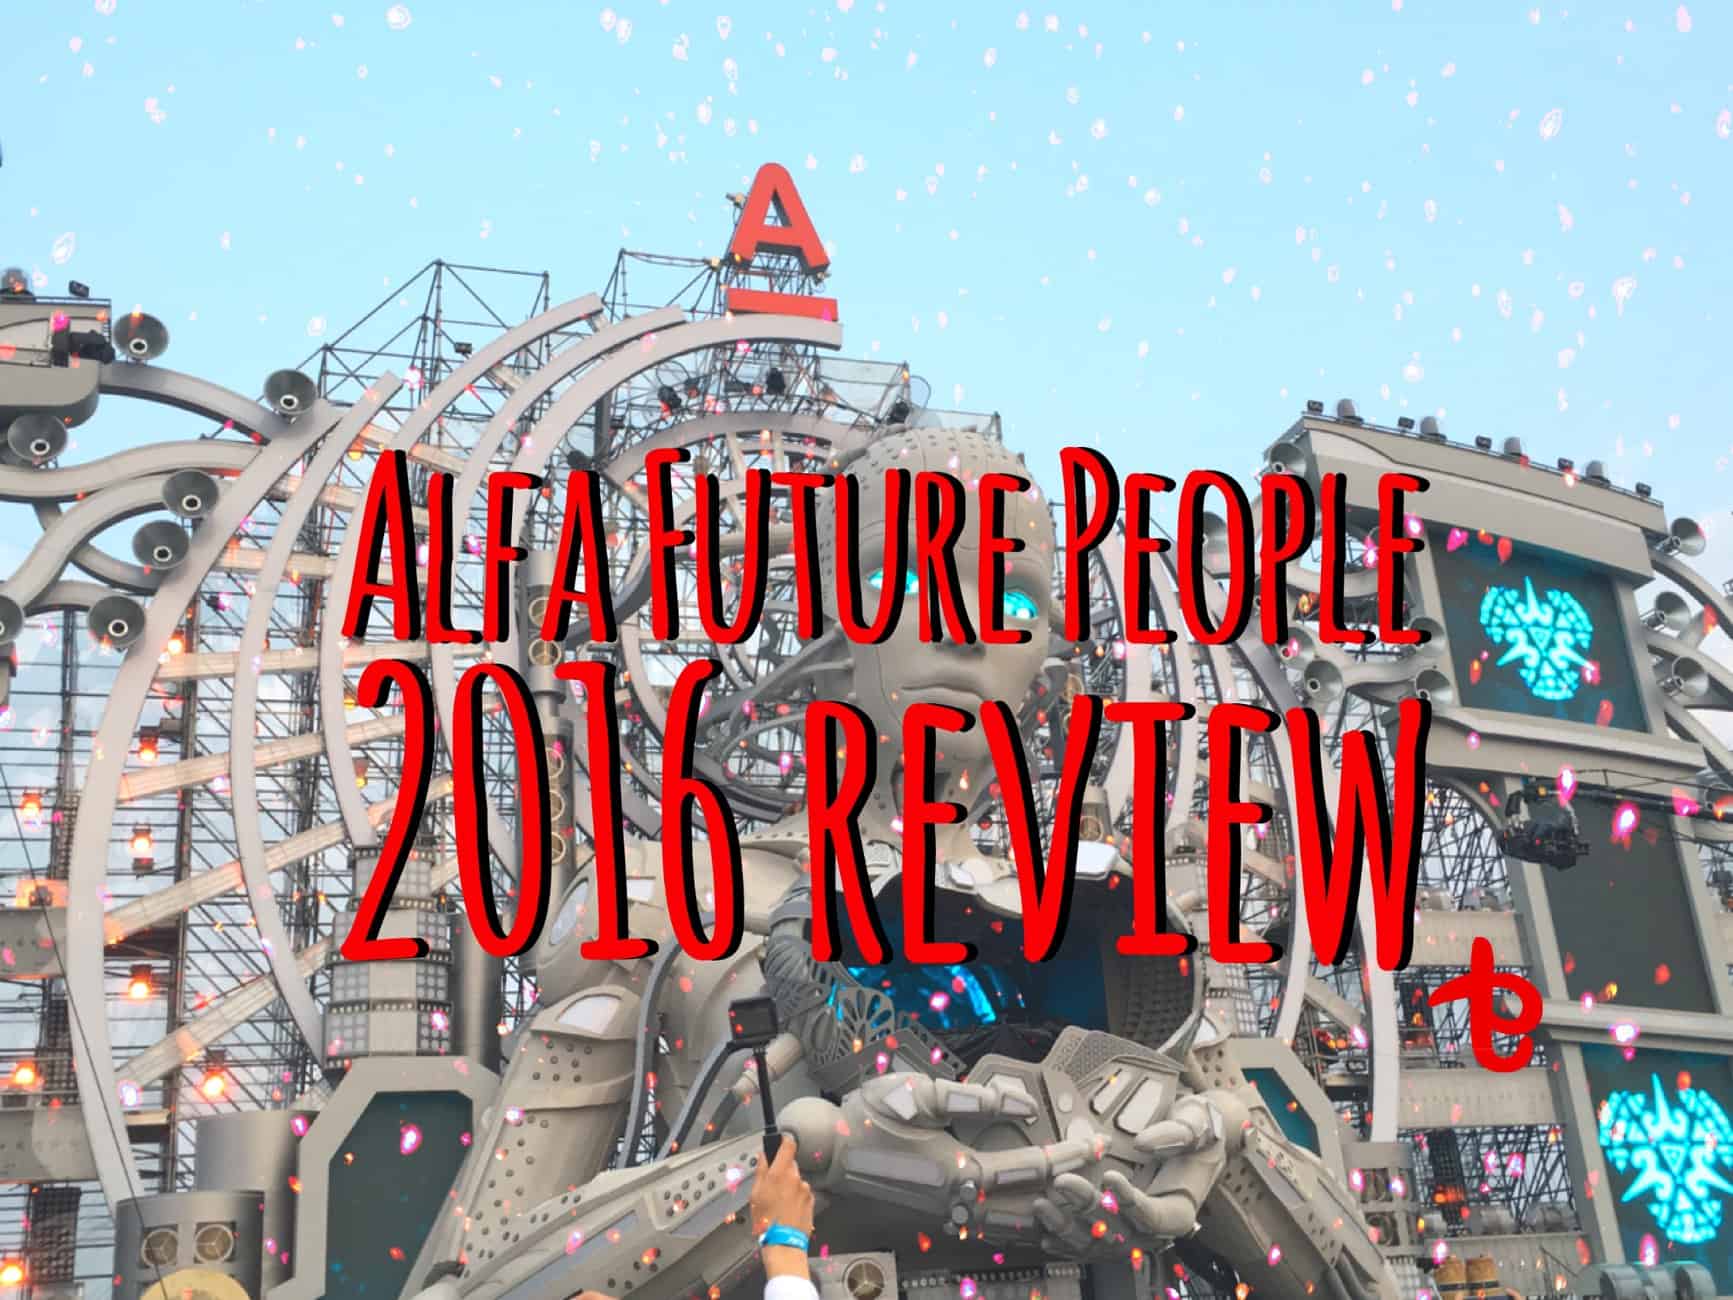 Review of Alfa Future People – one of the best electronic music festivals